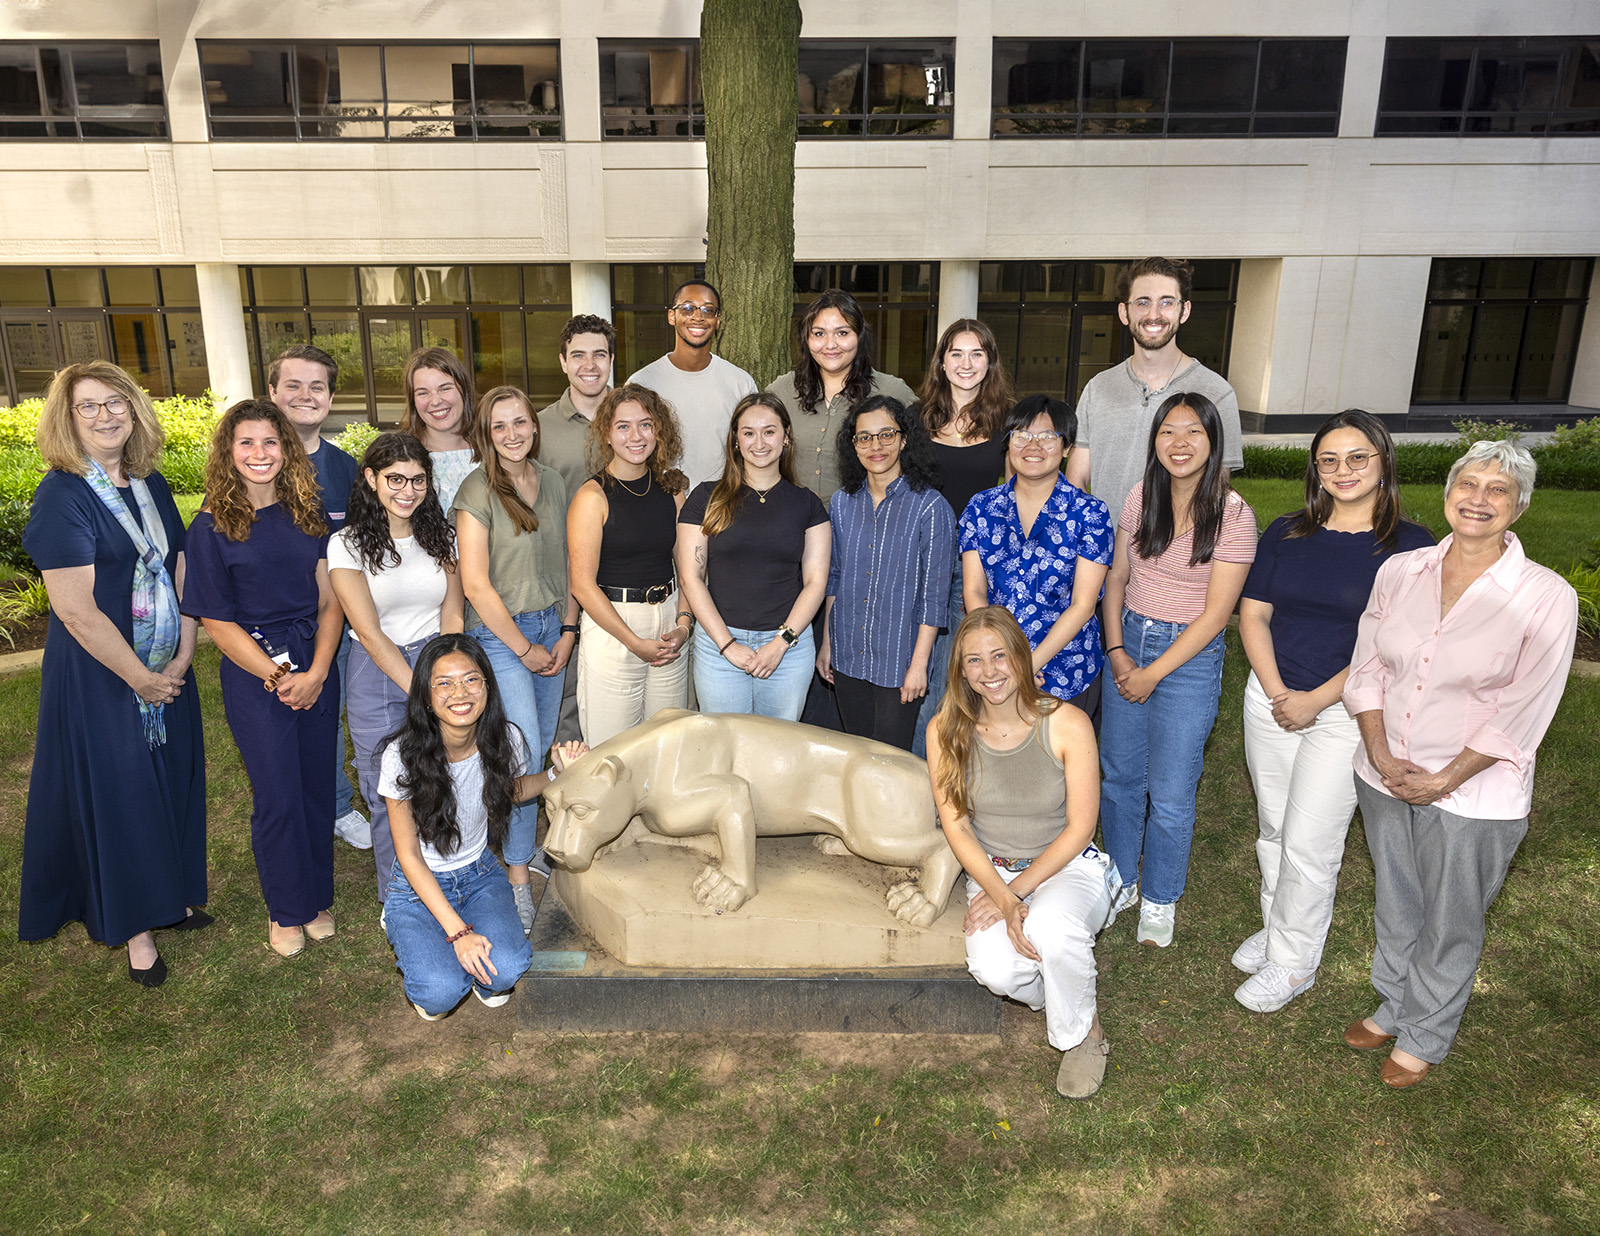 A group of 20 people pose in the College of Medicine courtyard around the Nittany Lion statue; two are kneeling or seated at the sides of the statue and the rest are standing behind and to the side.